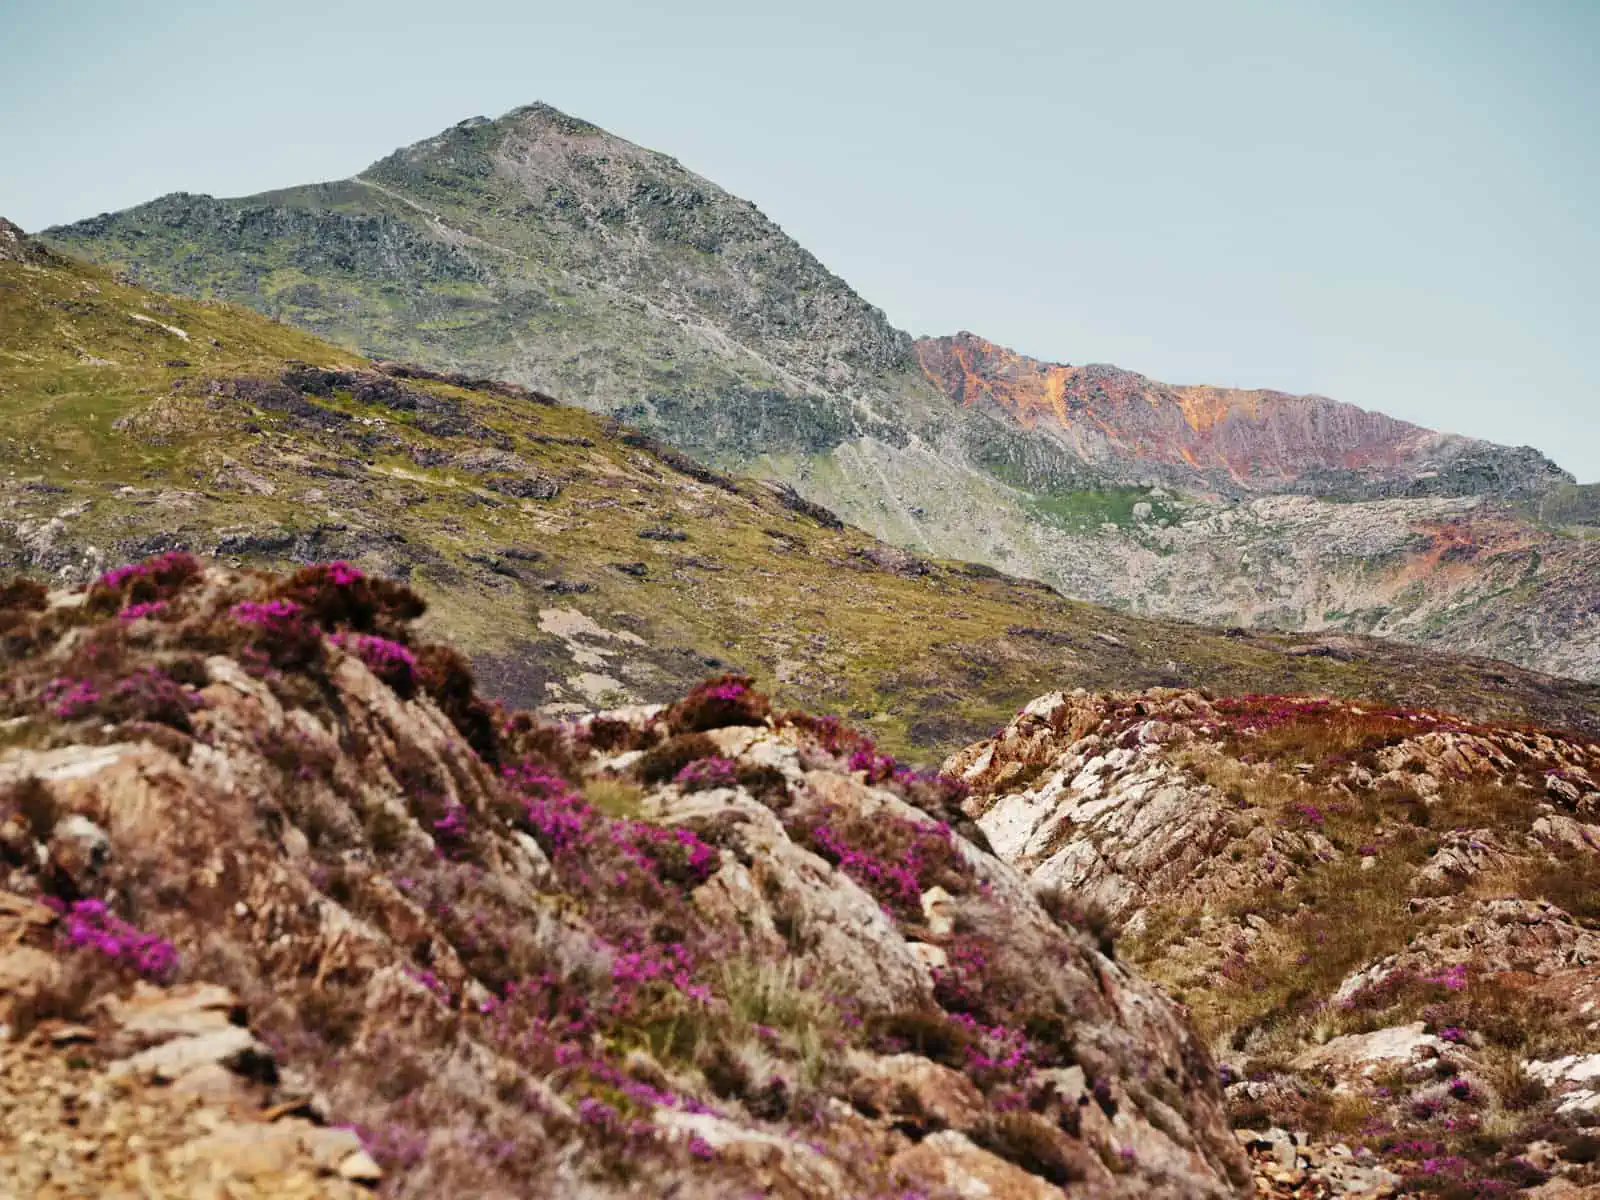 ID: A landscape image. The scene is bright and it is summer. The foreground contains rocky outcrops with pink mountain flowers. In the mid ground is a layer of green mountain slope. In the background are taller mountains - with summer colours of greens, and grey and mineral colours of red being brought out of the rock. The sky is fully blue, with not a cloud in sight - but is very pale.